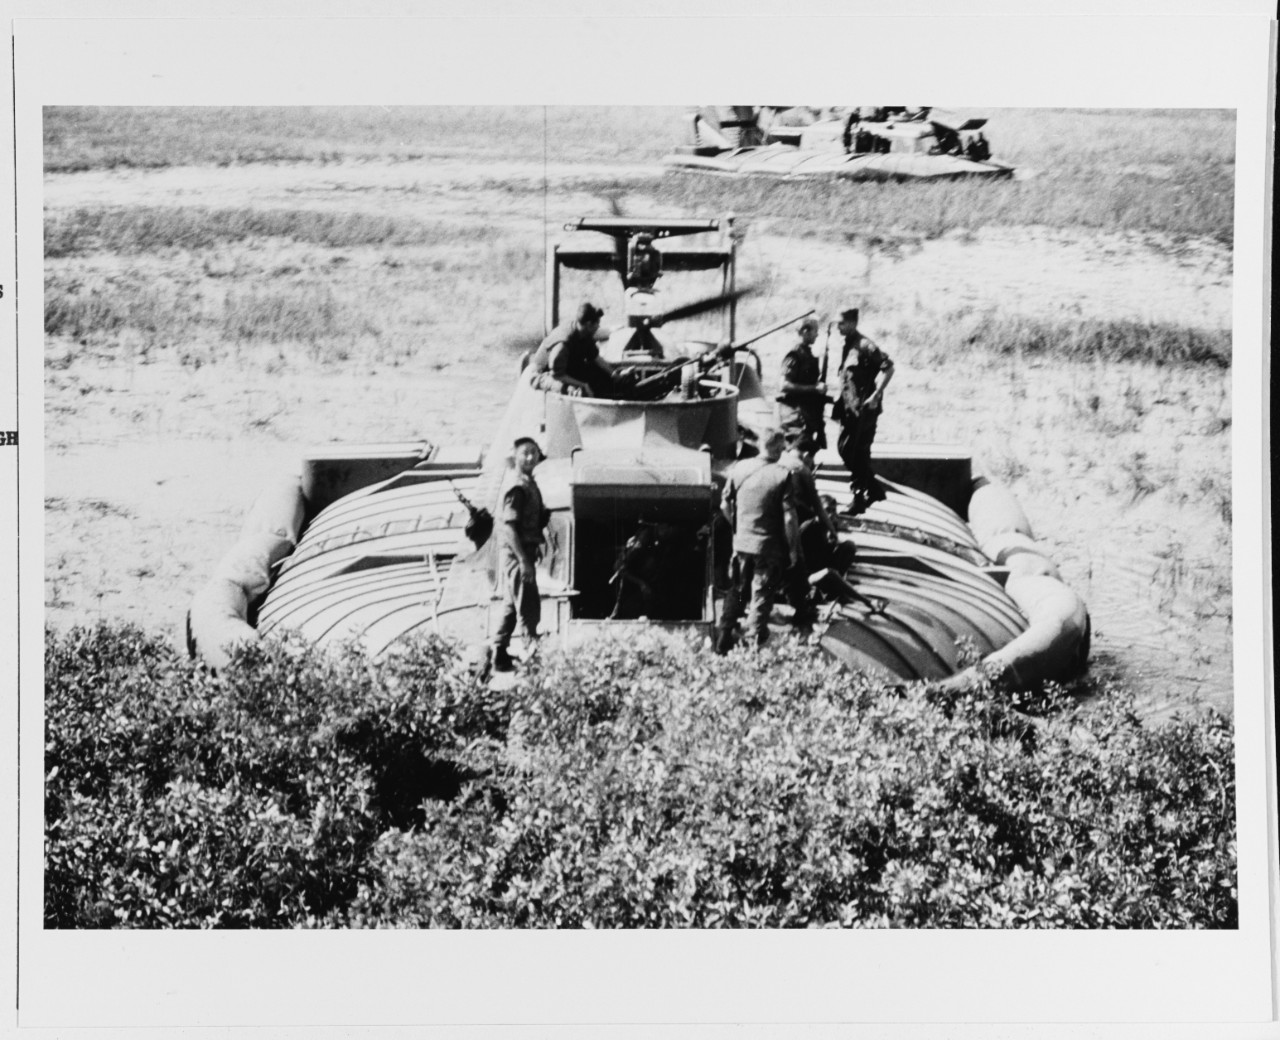 Crewmen of a PACV (patrol air cushion vehicle) and Vietnamese troops round up Viet Cong suspects